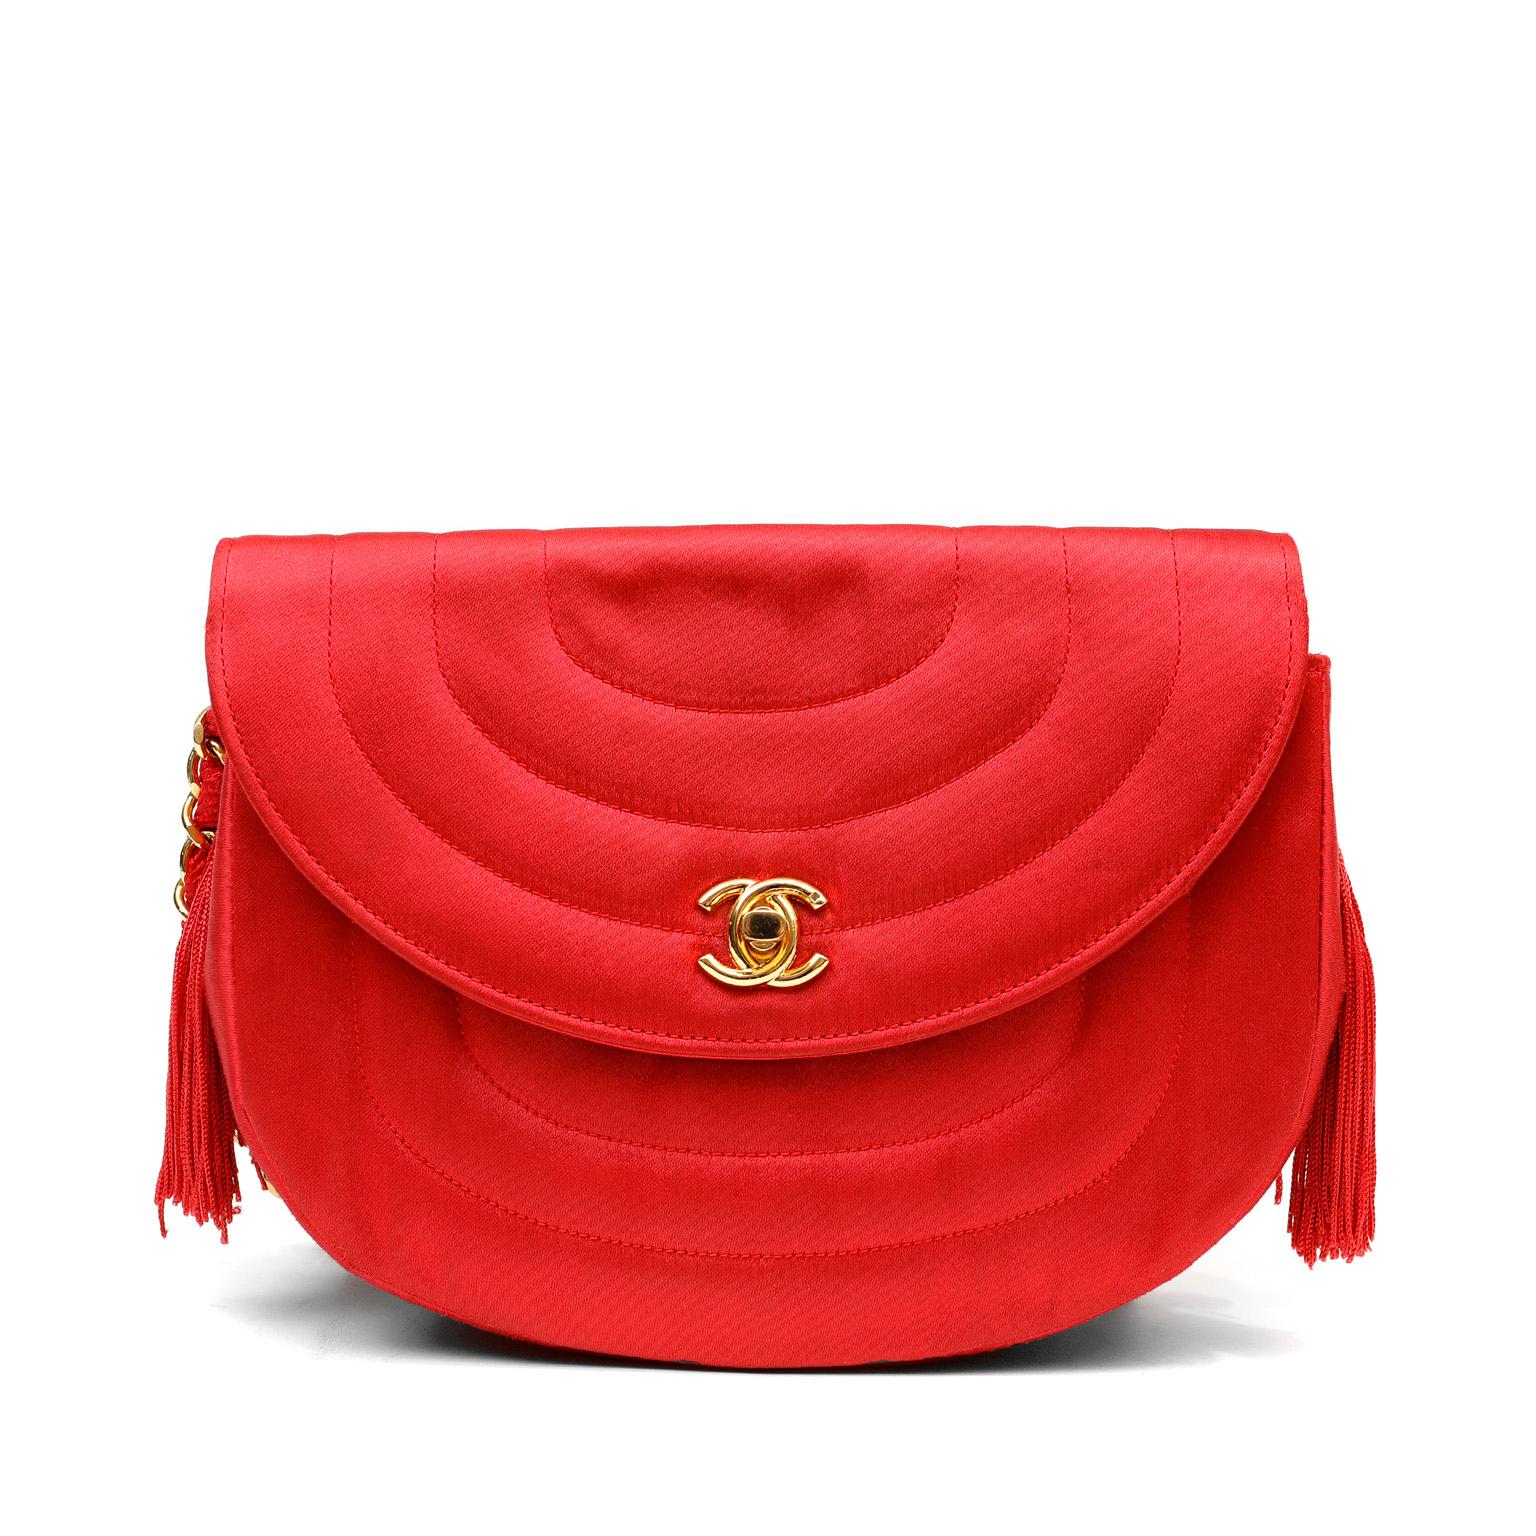 This authentic Chanel Red Satin Vintage Evening Bag is in lovely condition.  Uniquely shaped in vivid red satin, this crossbody piece is truly beautiful.  Bright red satin vintage bag with soft half-moon shaped flap and gold tone hardware accents. 